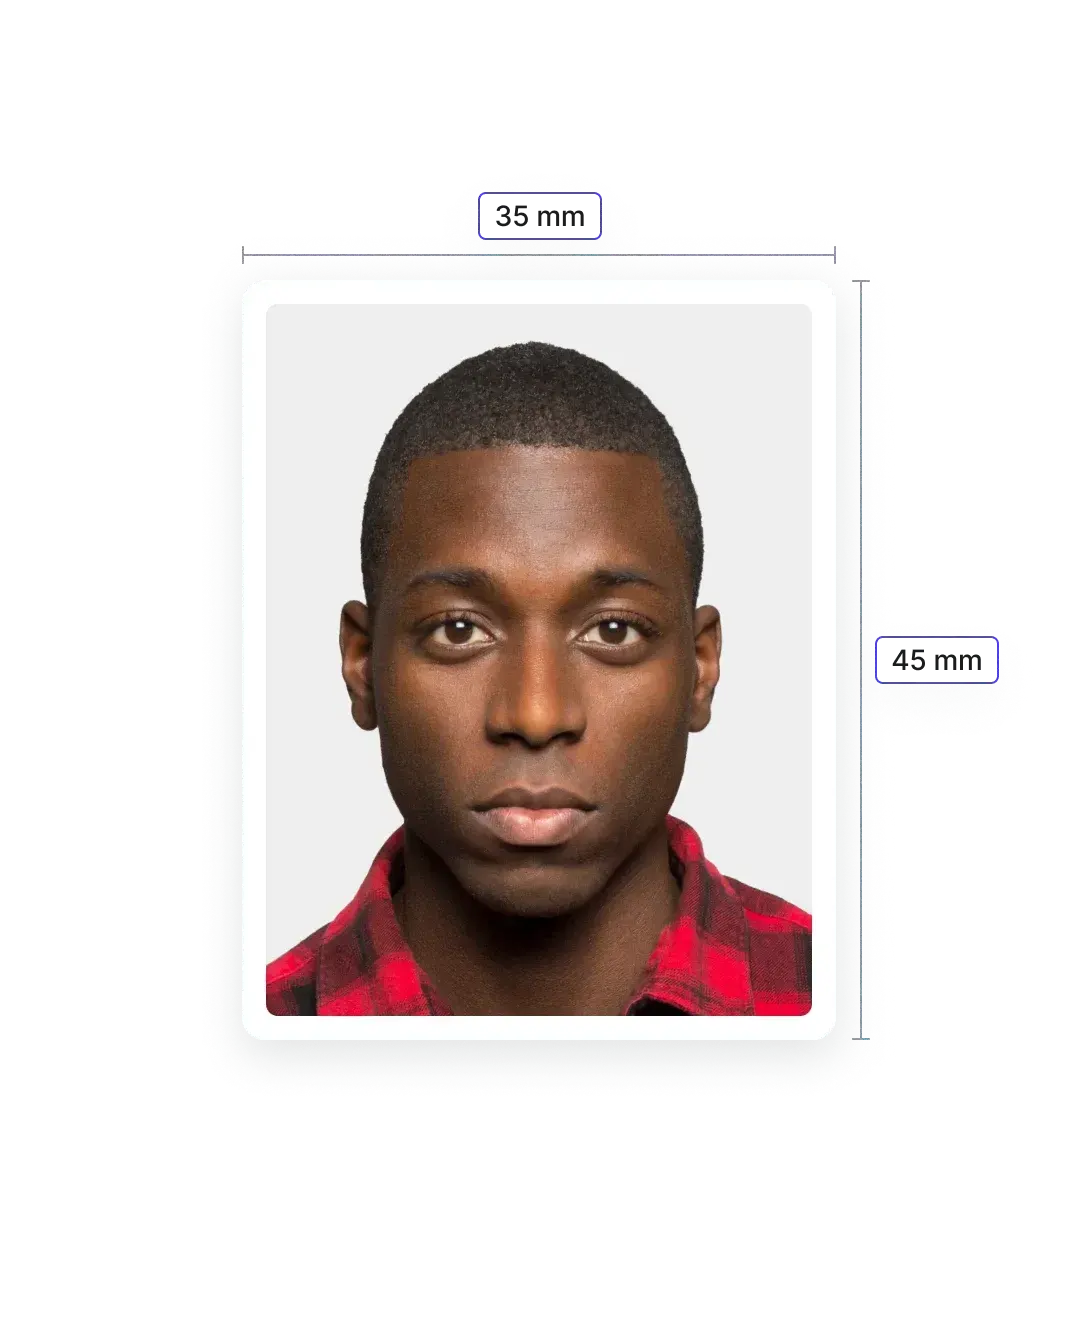 South Africa Visa Photo: Size and Requirements